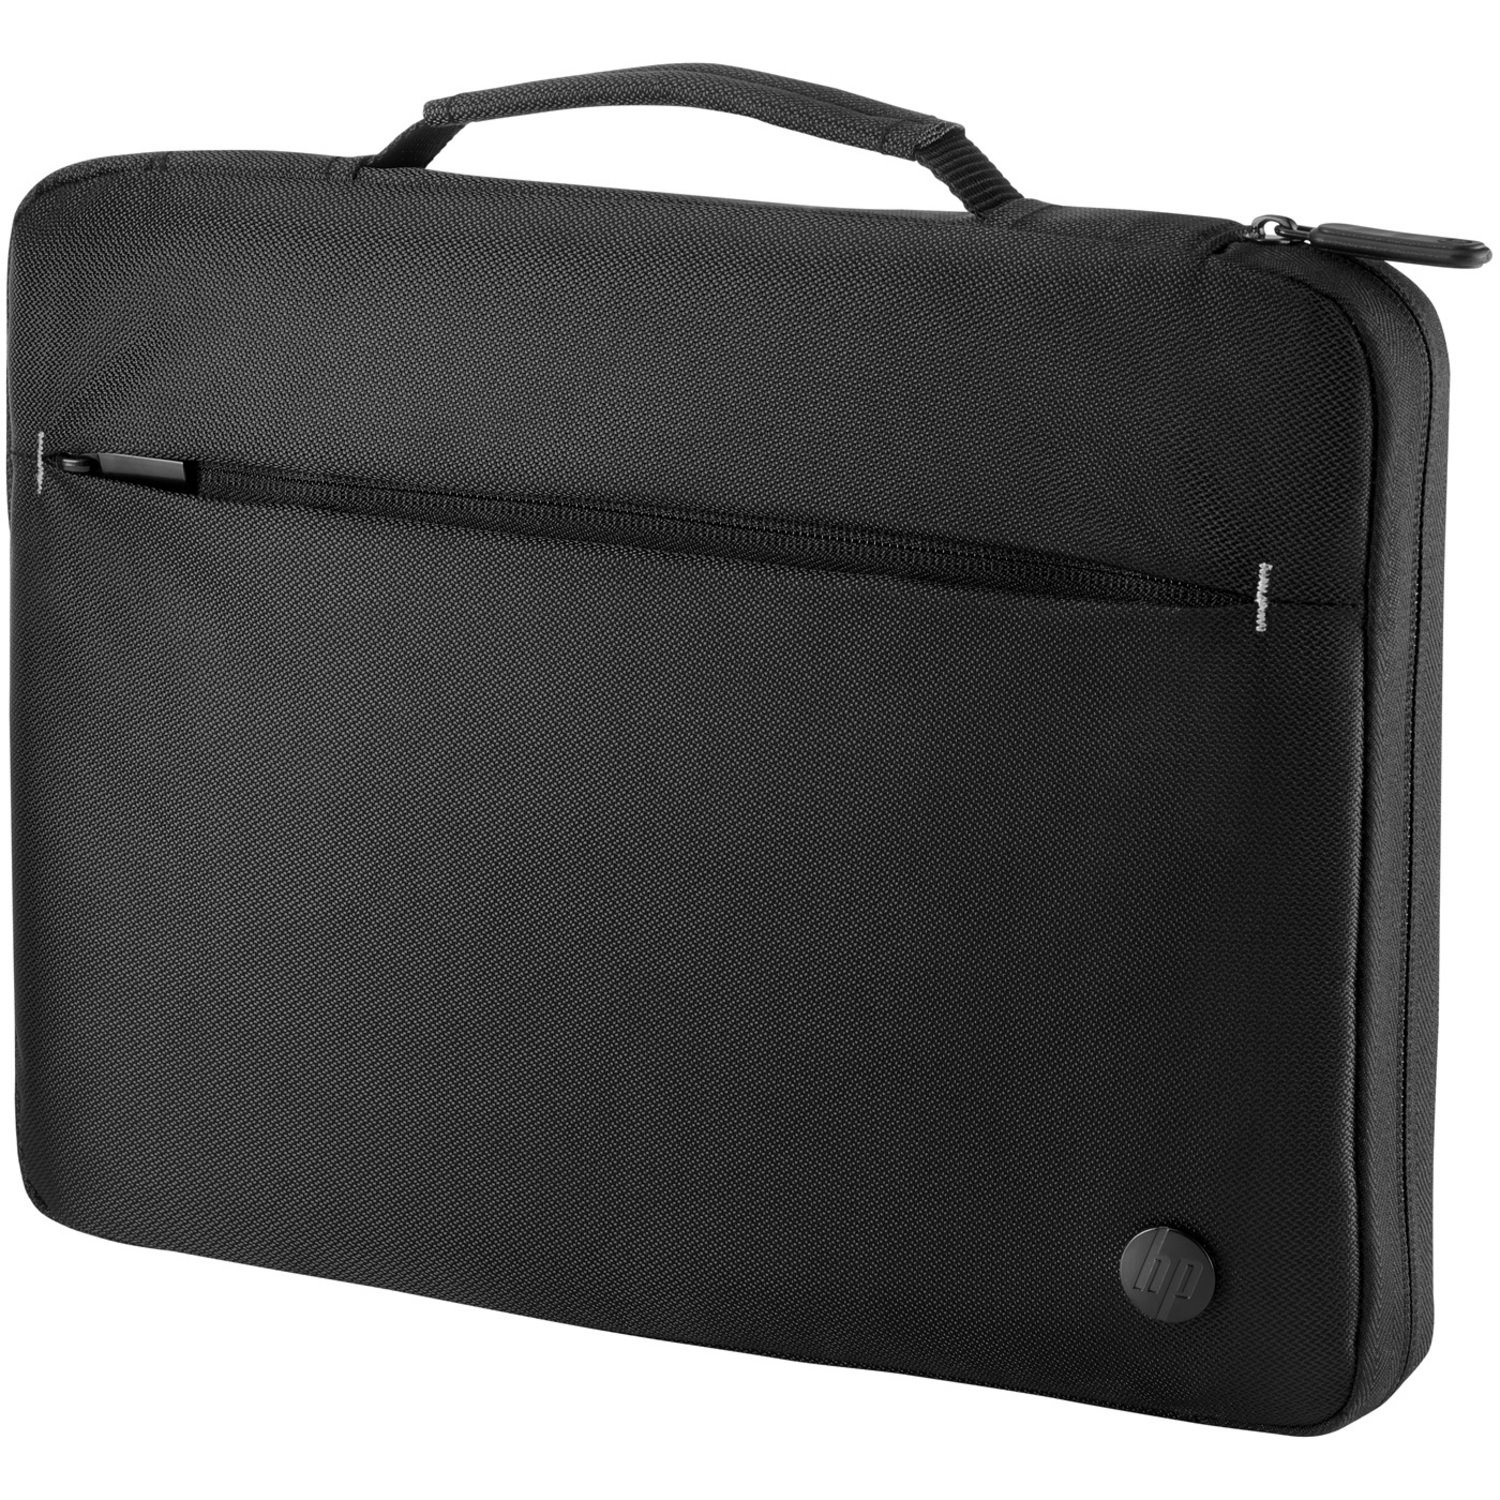 HP Business Carrying Case (Sleeve) for 33.8 cm (13.3") Notebook - Black